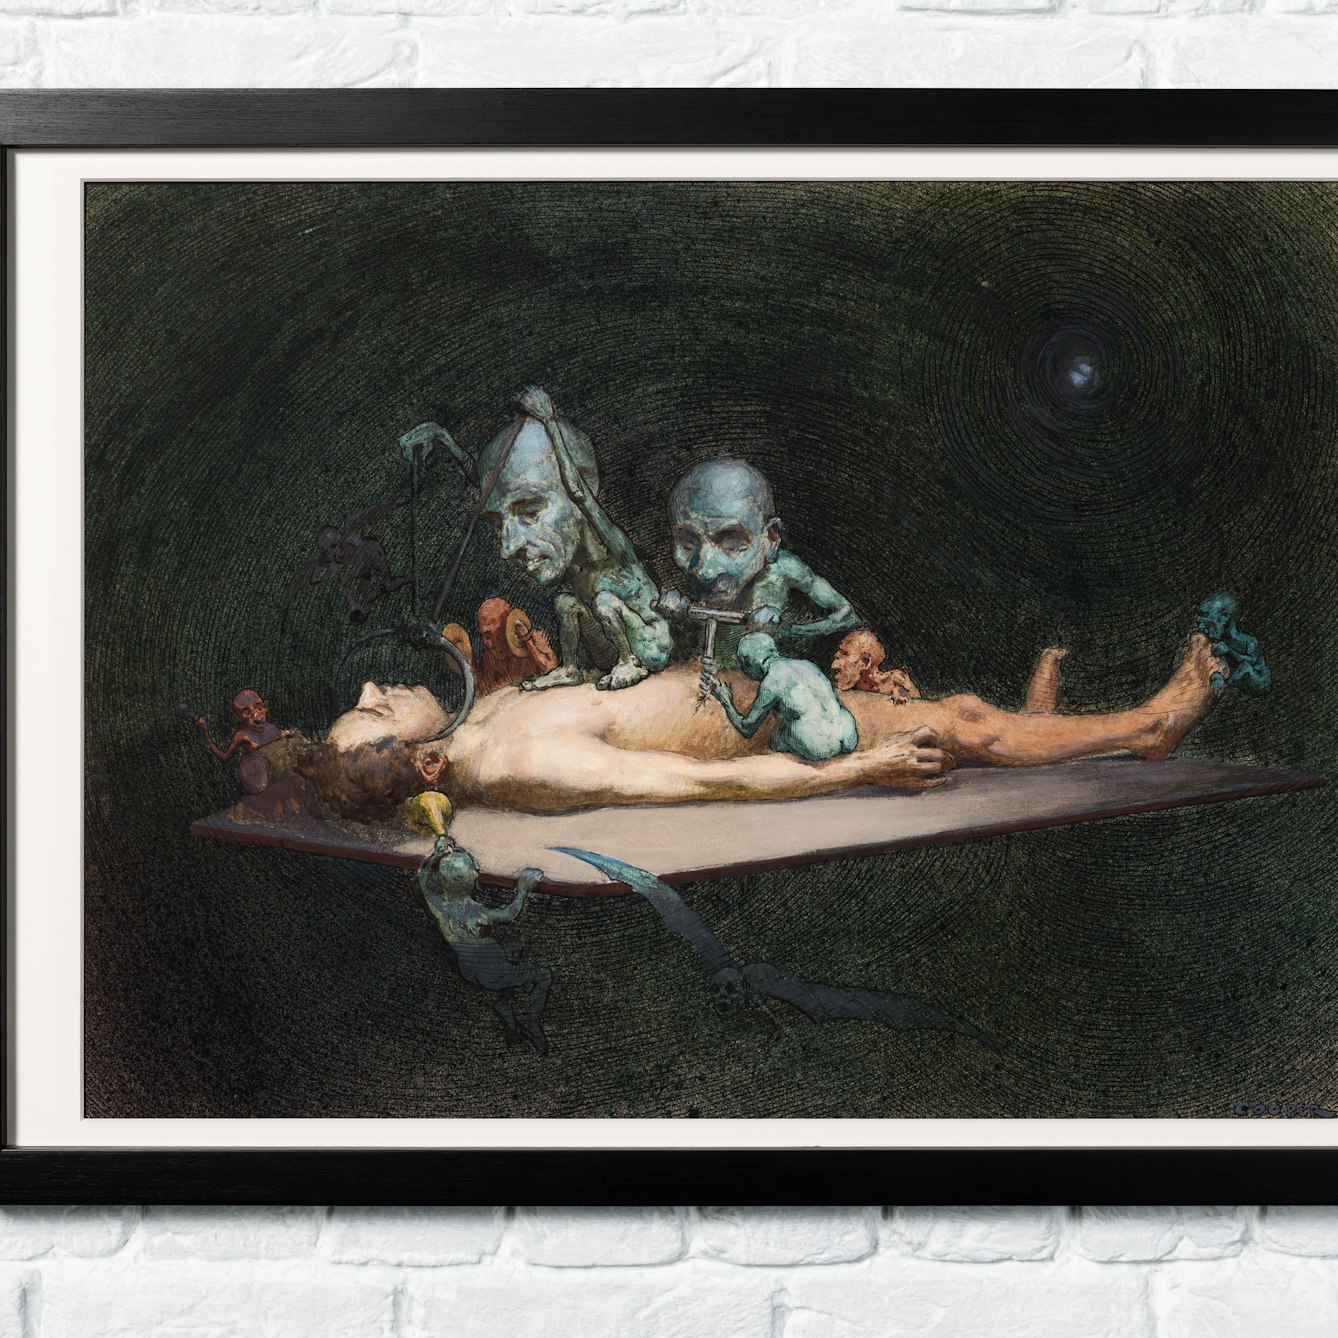 Watercolour painting showing an unconscious naked man lying on a table being attacked by little demons armed with surgical instruments